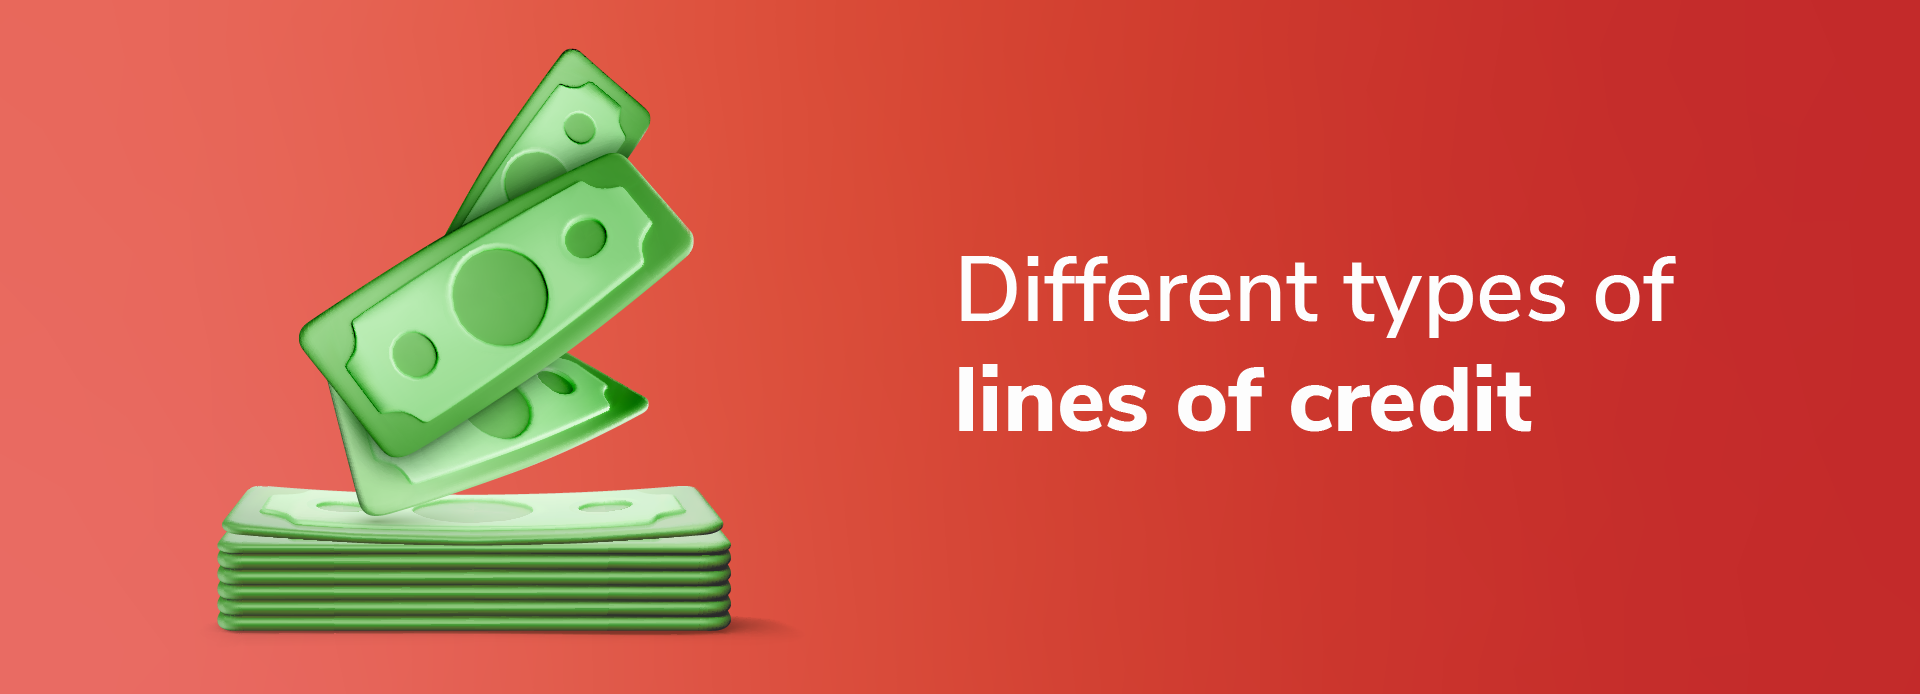 Different types of lines of credit: Which one suits your needs? 